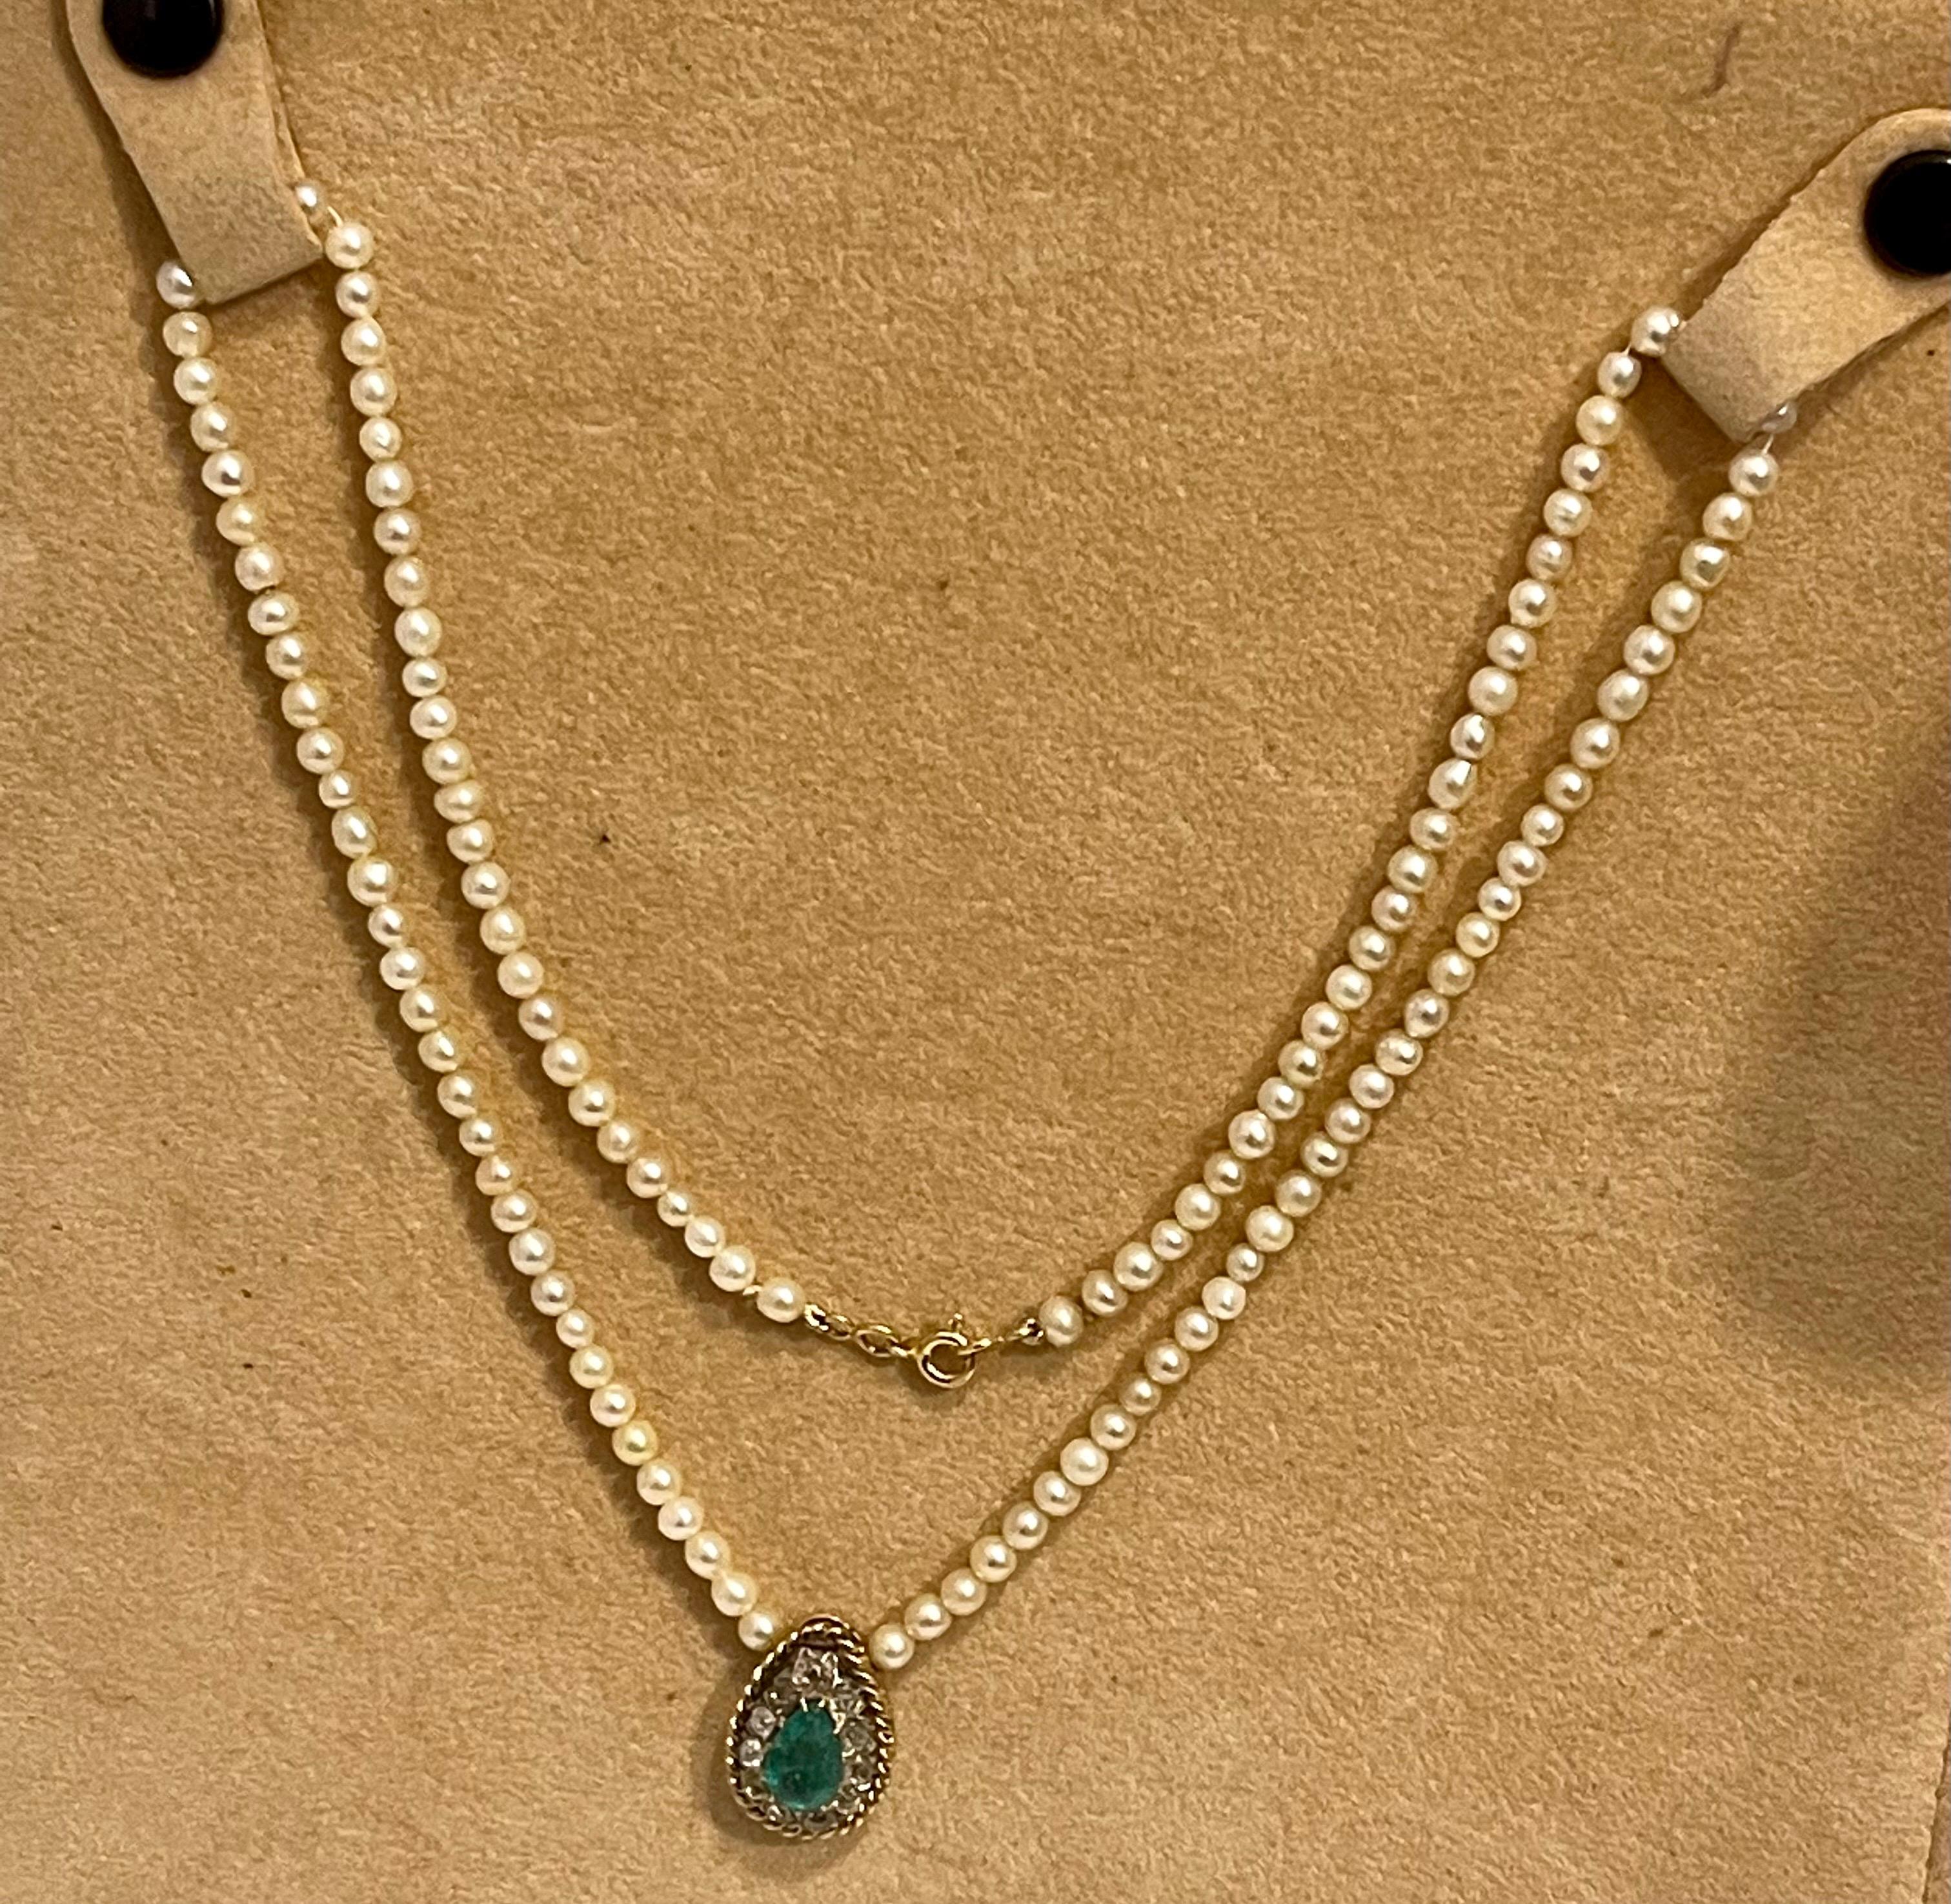 120 Years Old GIA Certified Natural Basra Pearls & Emerald Necklace 14KY Gold For Sale 2